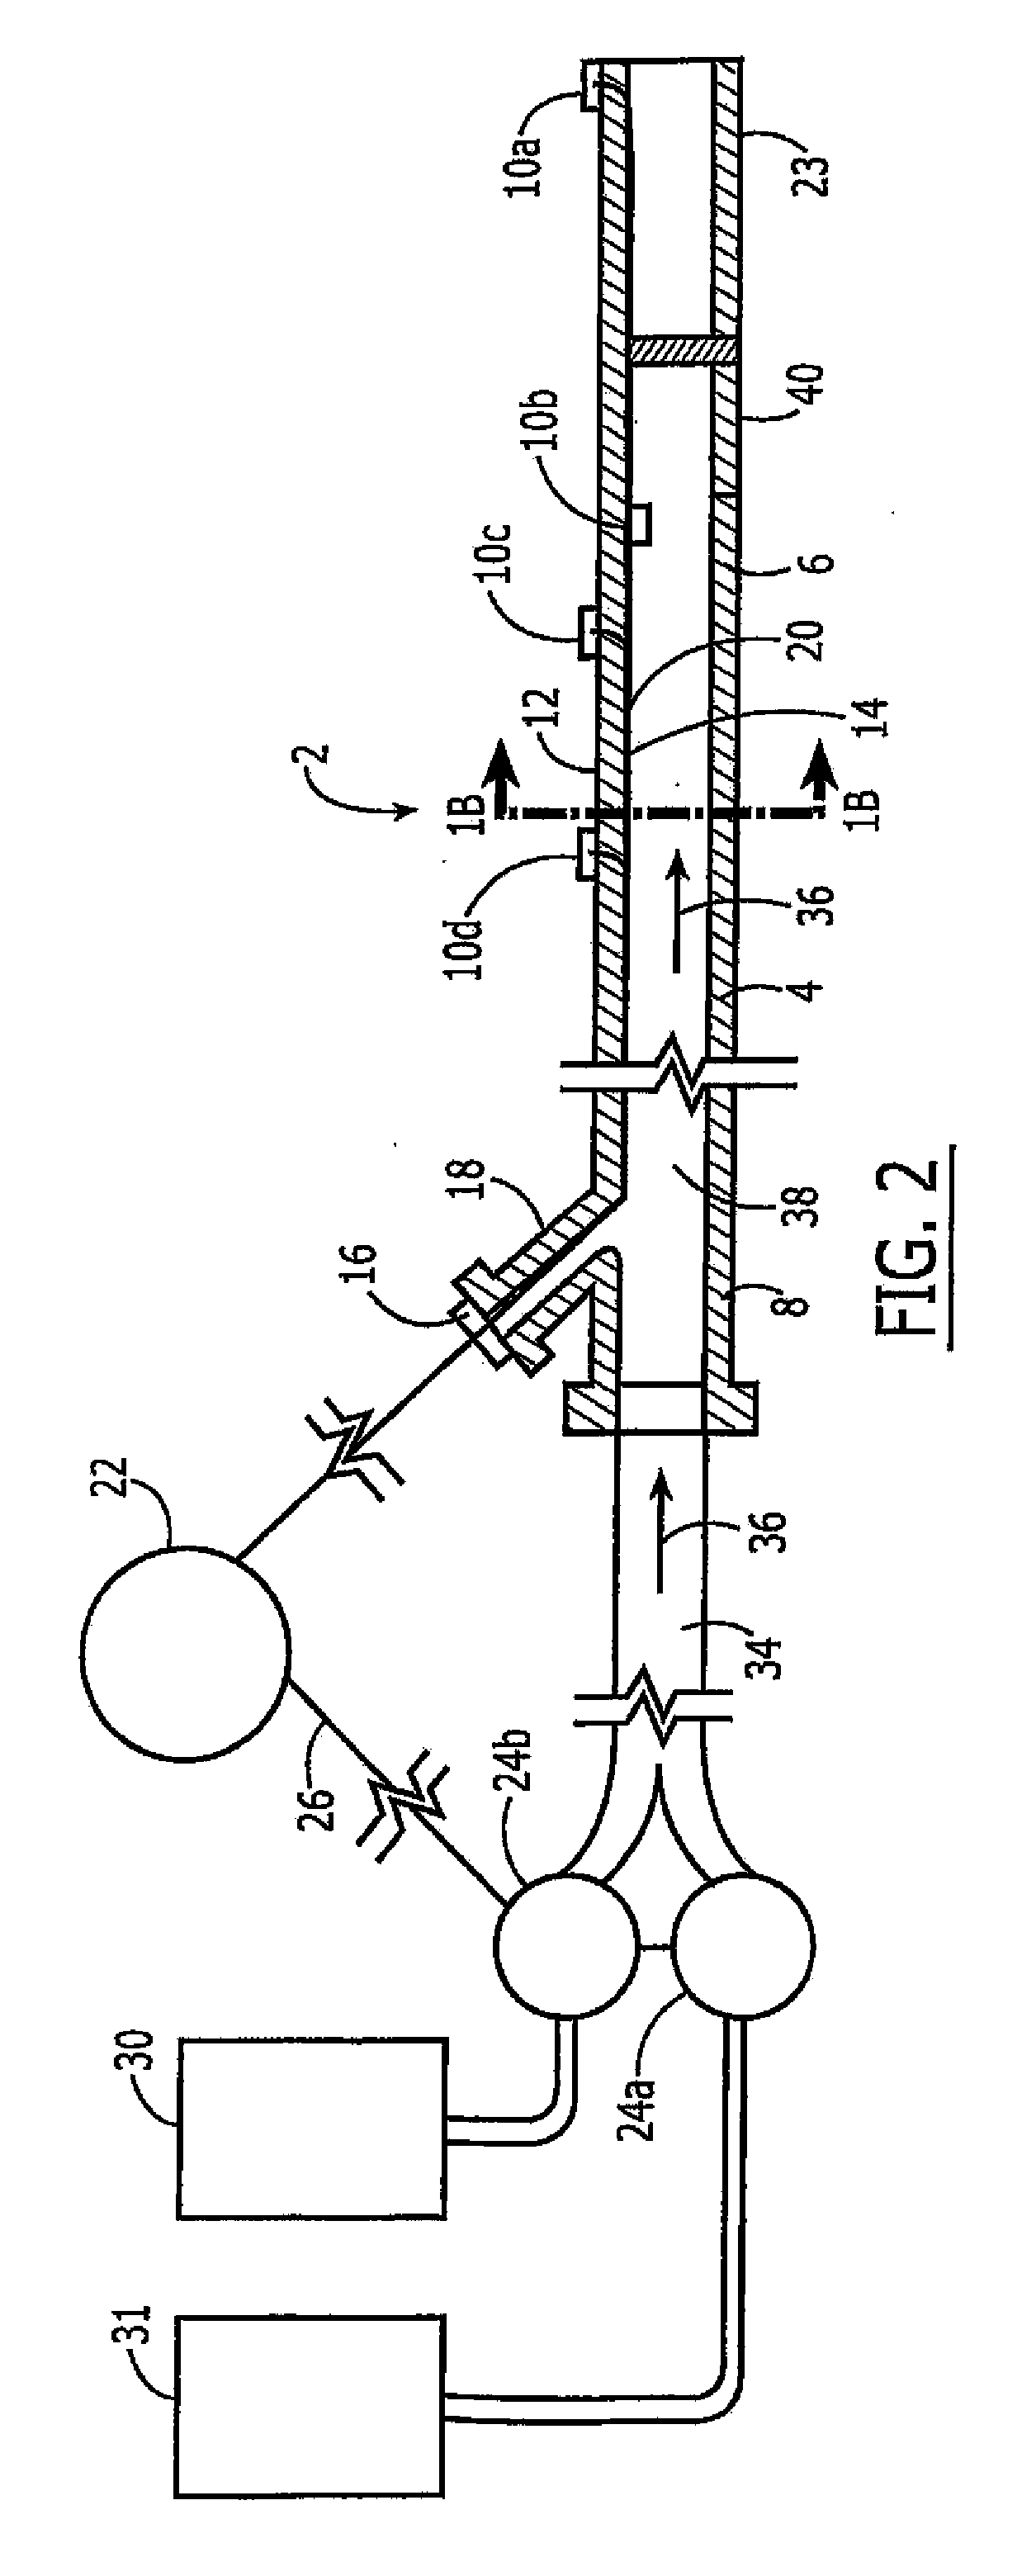 Systems and methods for intravascular cooling